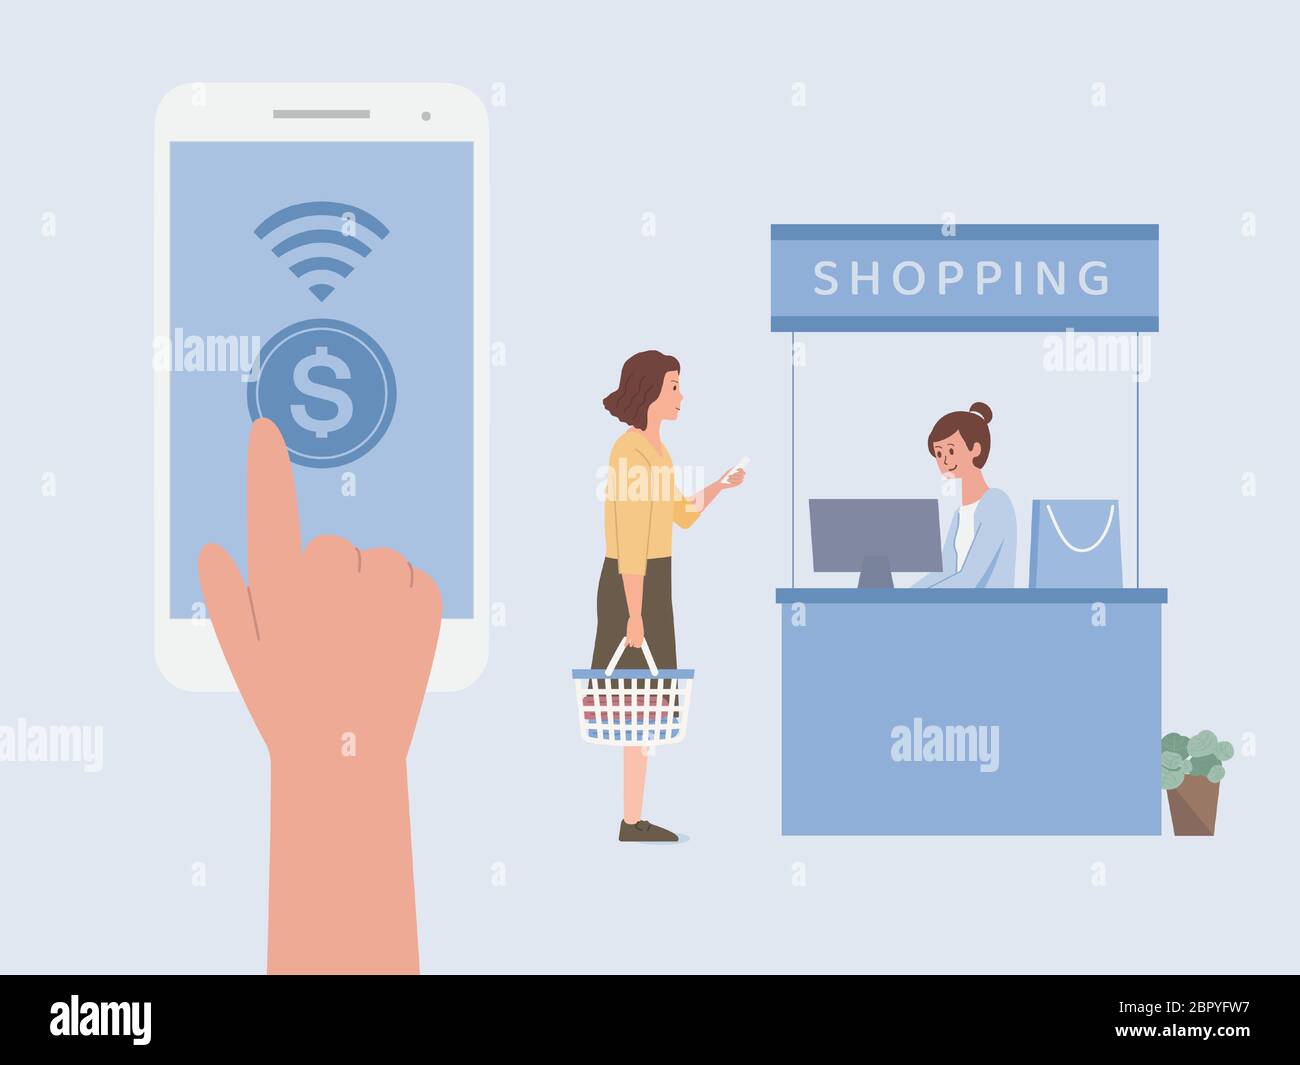 One fingure touching on mobile screen for using online Payment to pay money in front of Cash register at the cashier of a shopping center. Stock Vector